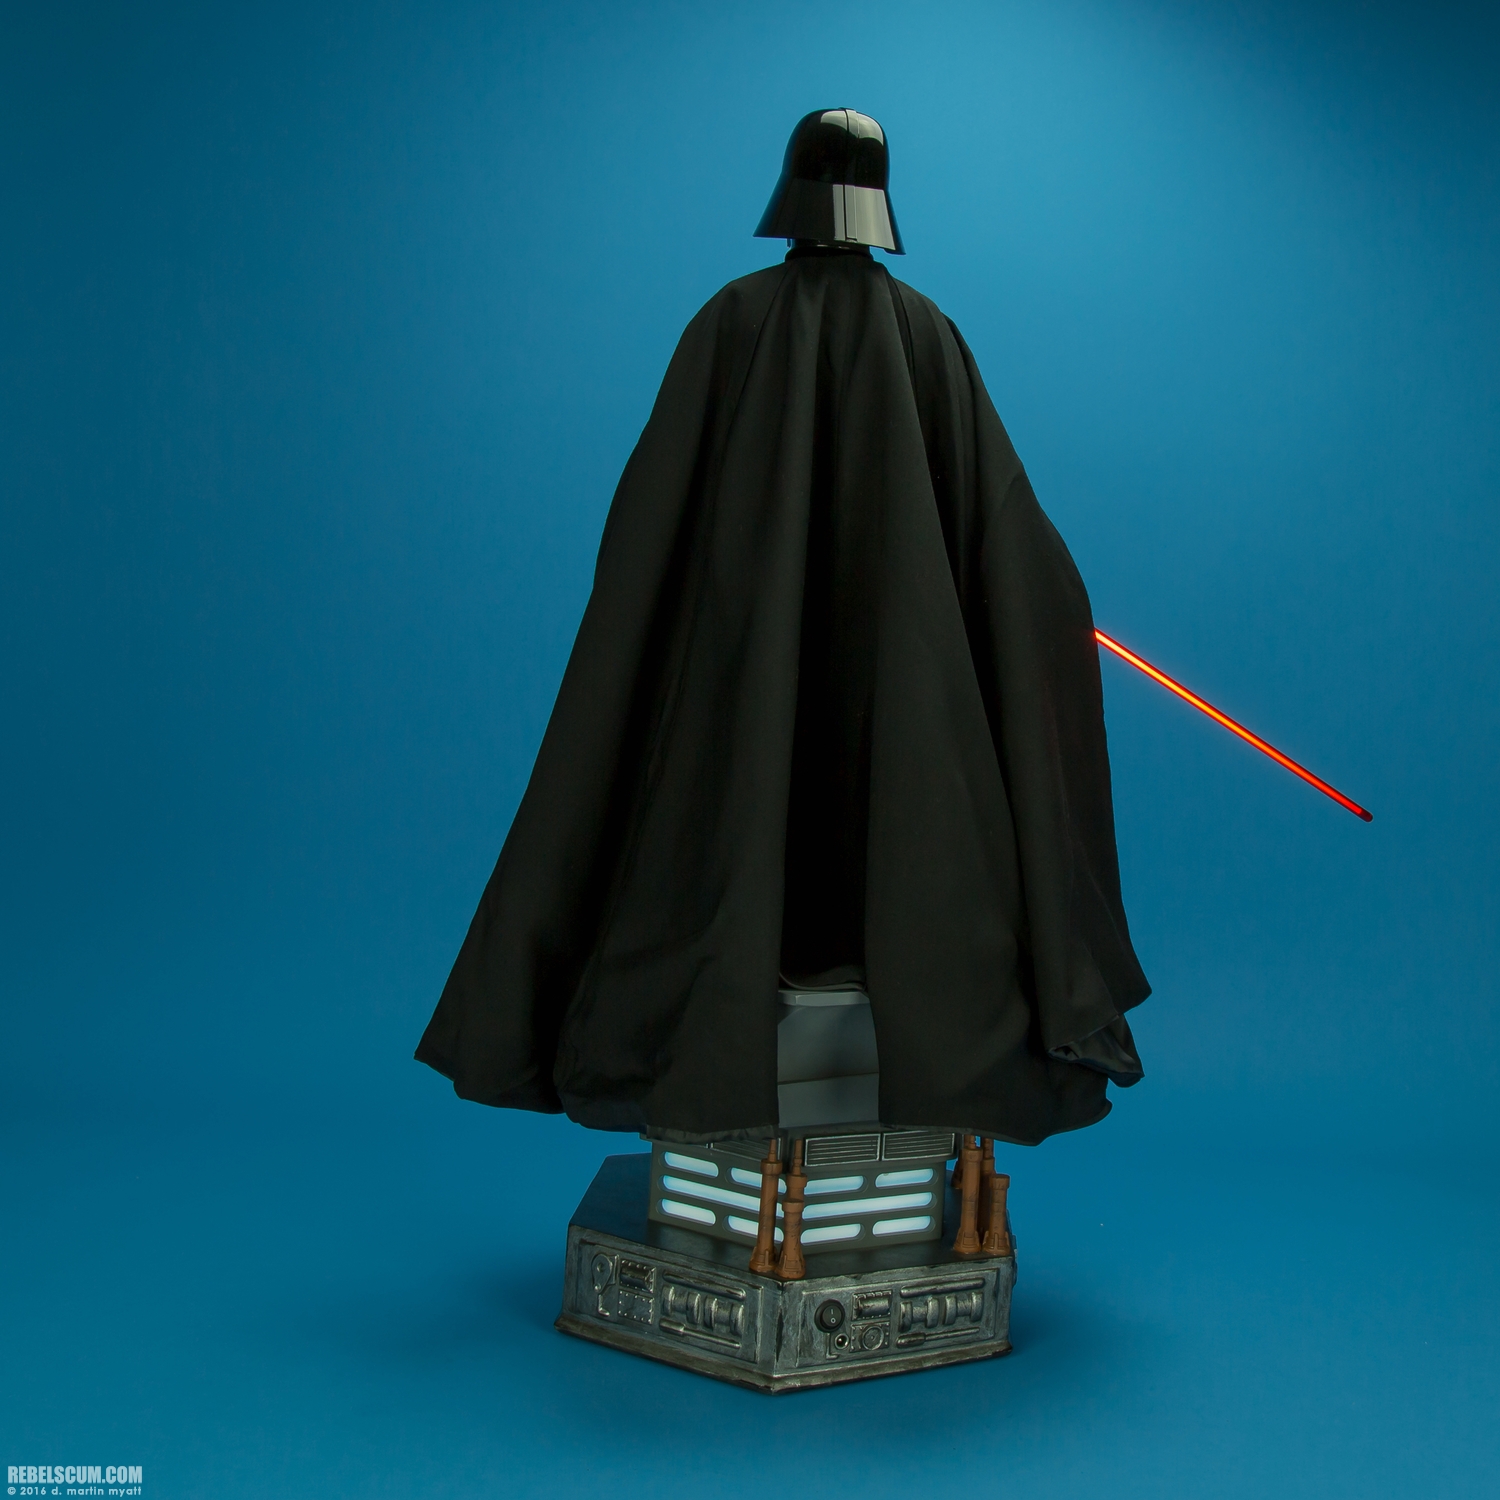 Darth-Vader-Lord-of-the-Sith-Premium-Format-Figure-Sideshow-004.jpg